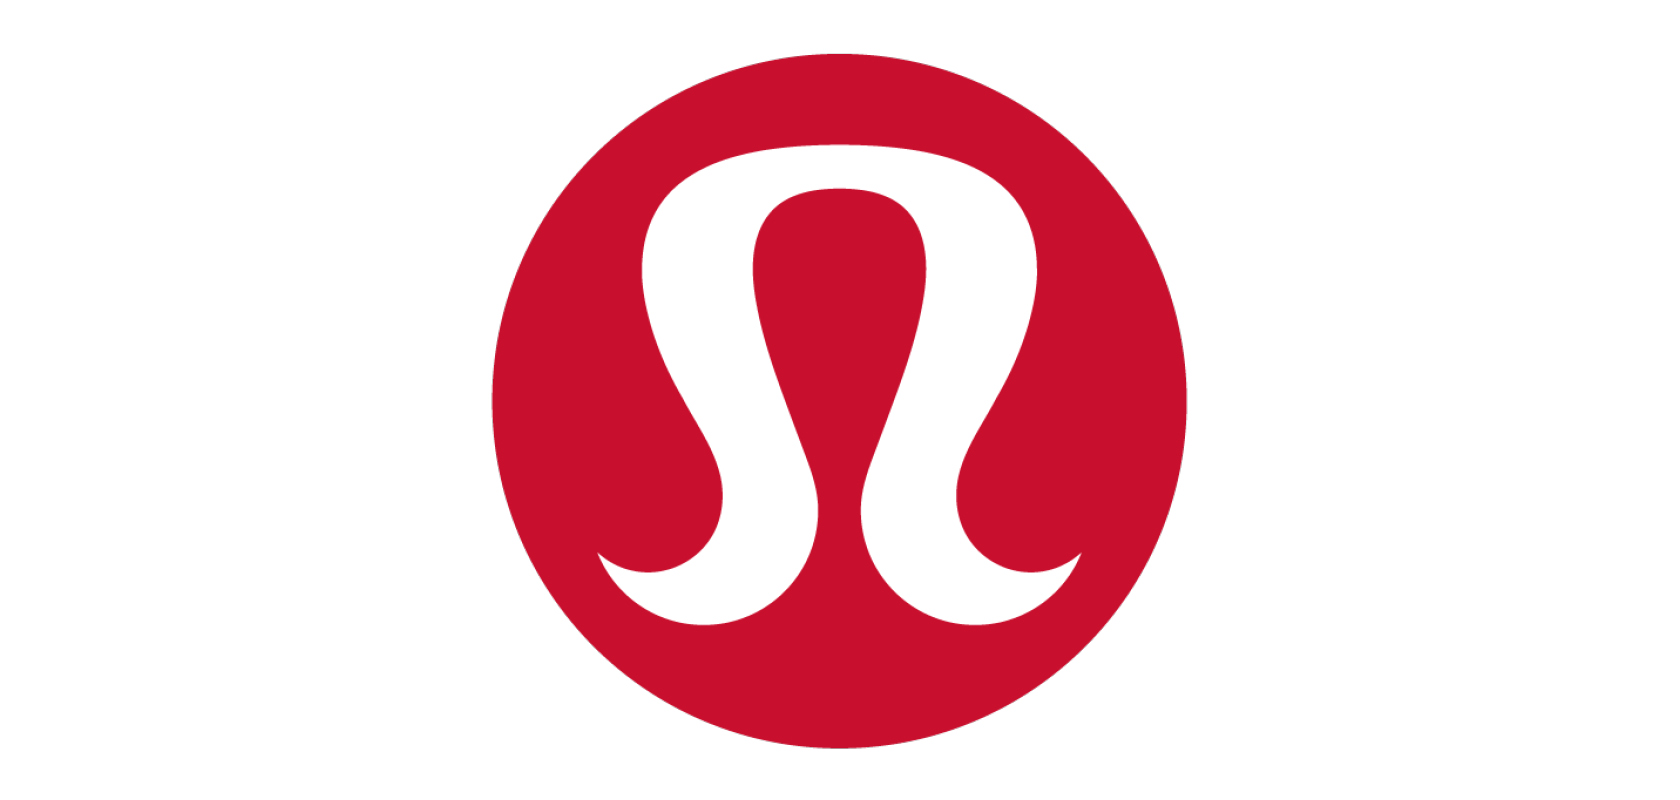 lululemon will have its grand opening tomorrow at 10AM at the